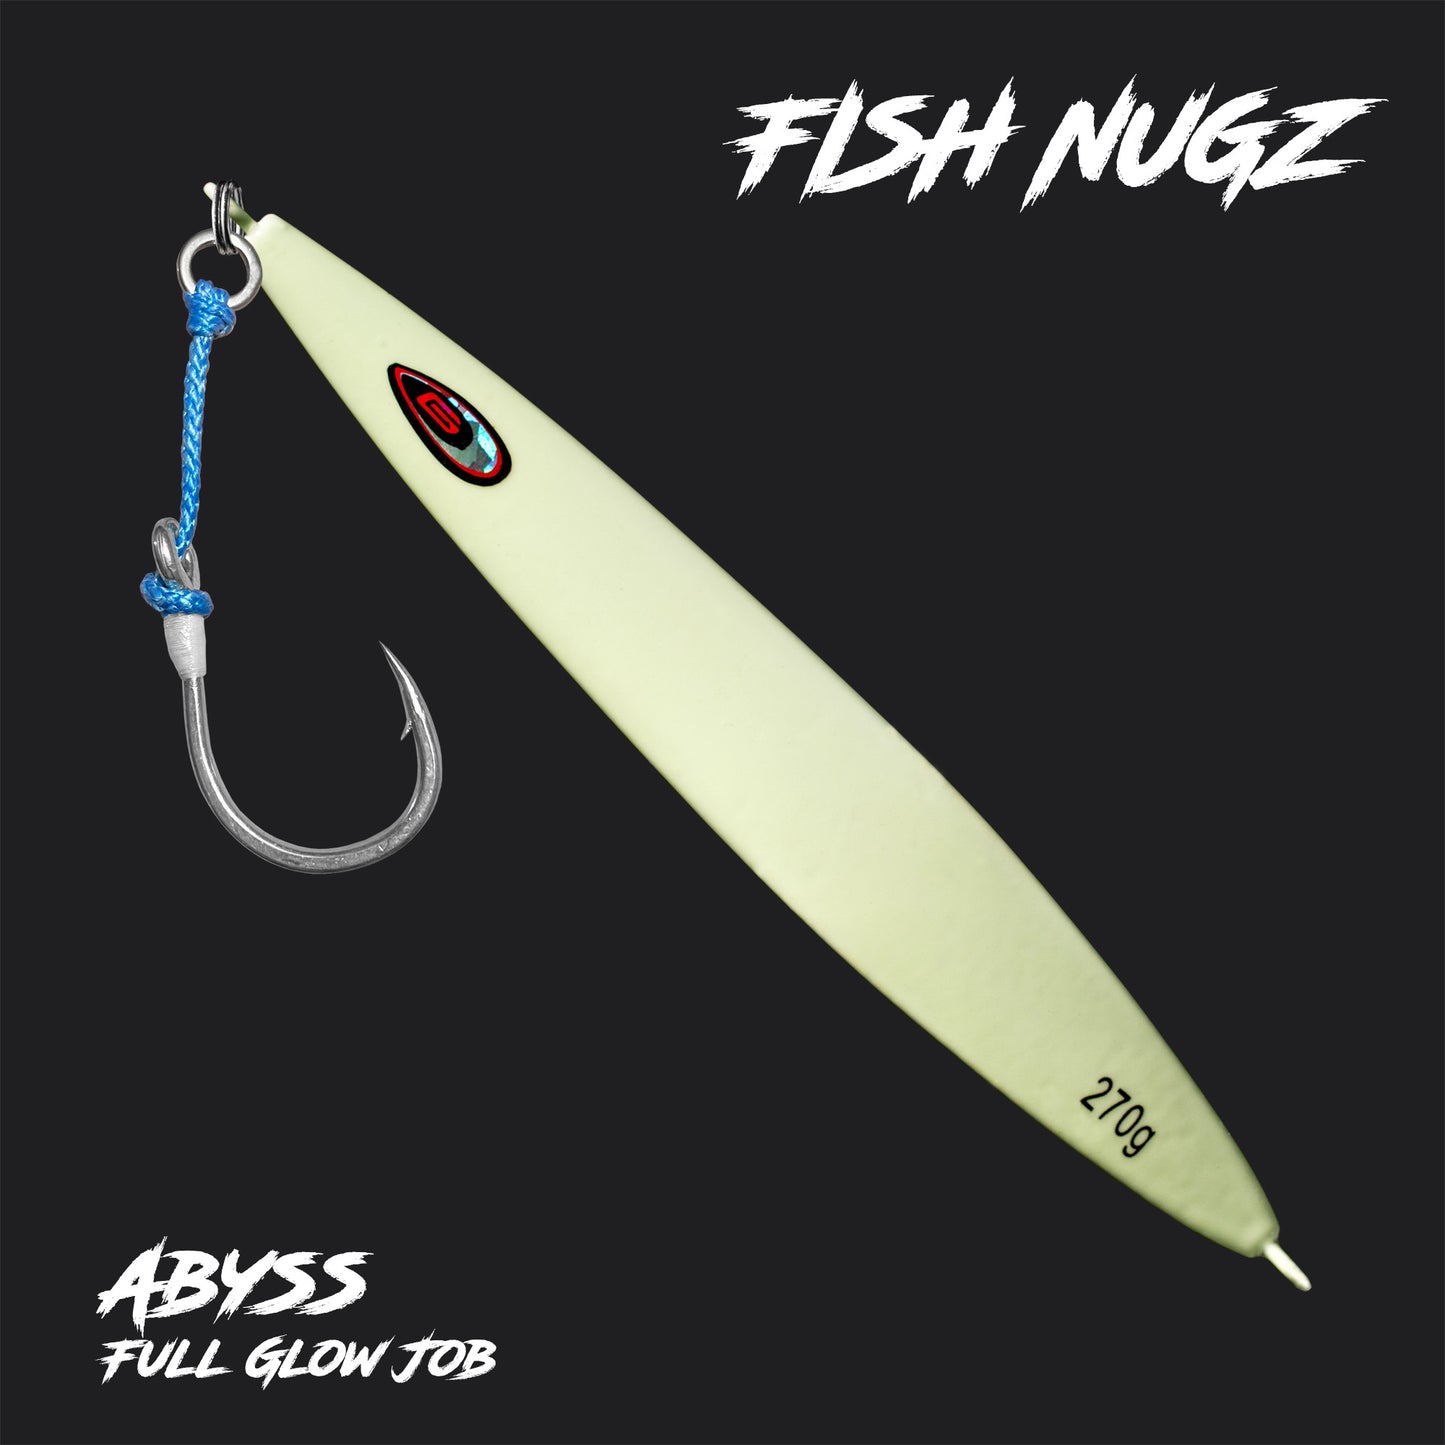 Fish Nugz Abyss Speed Jig in Full Glow Job colour